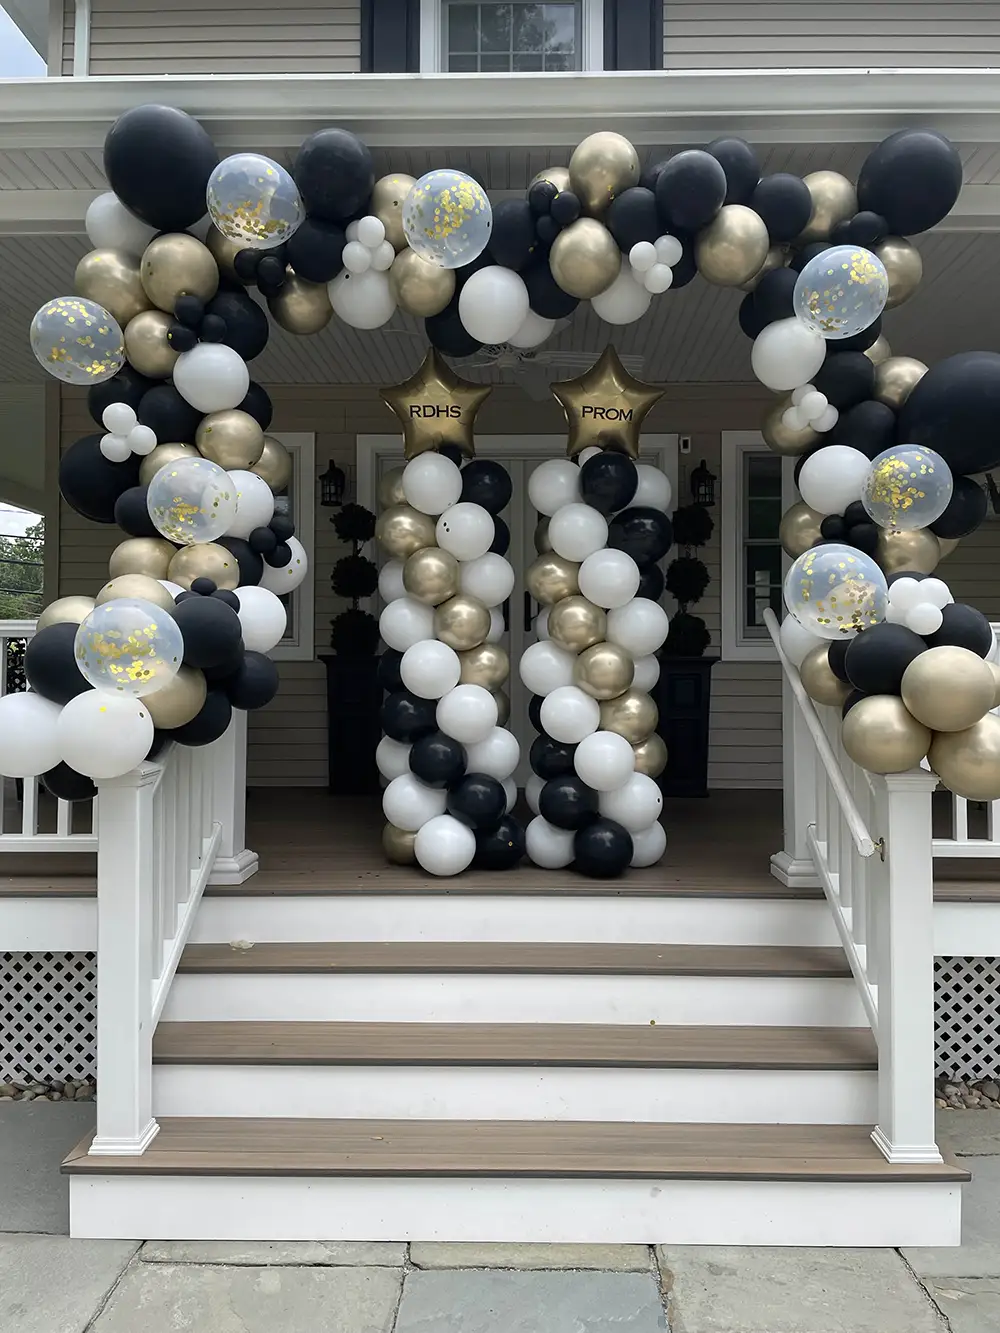 Balloon columns built for an event in Woodbridge NJ by Mint Sprig Balloons and Decor